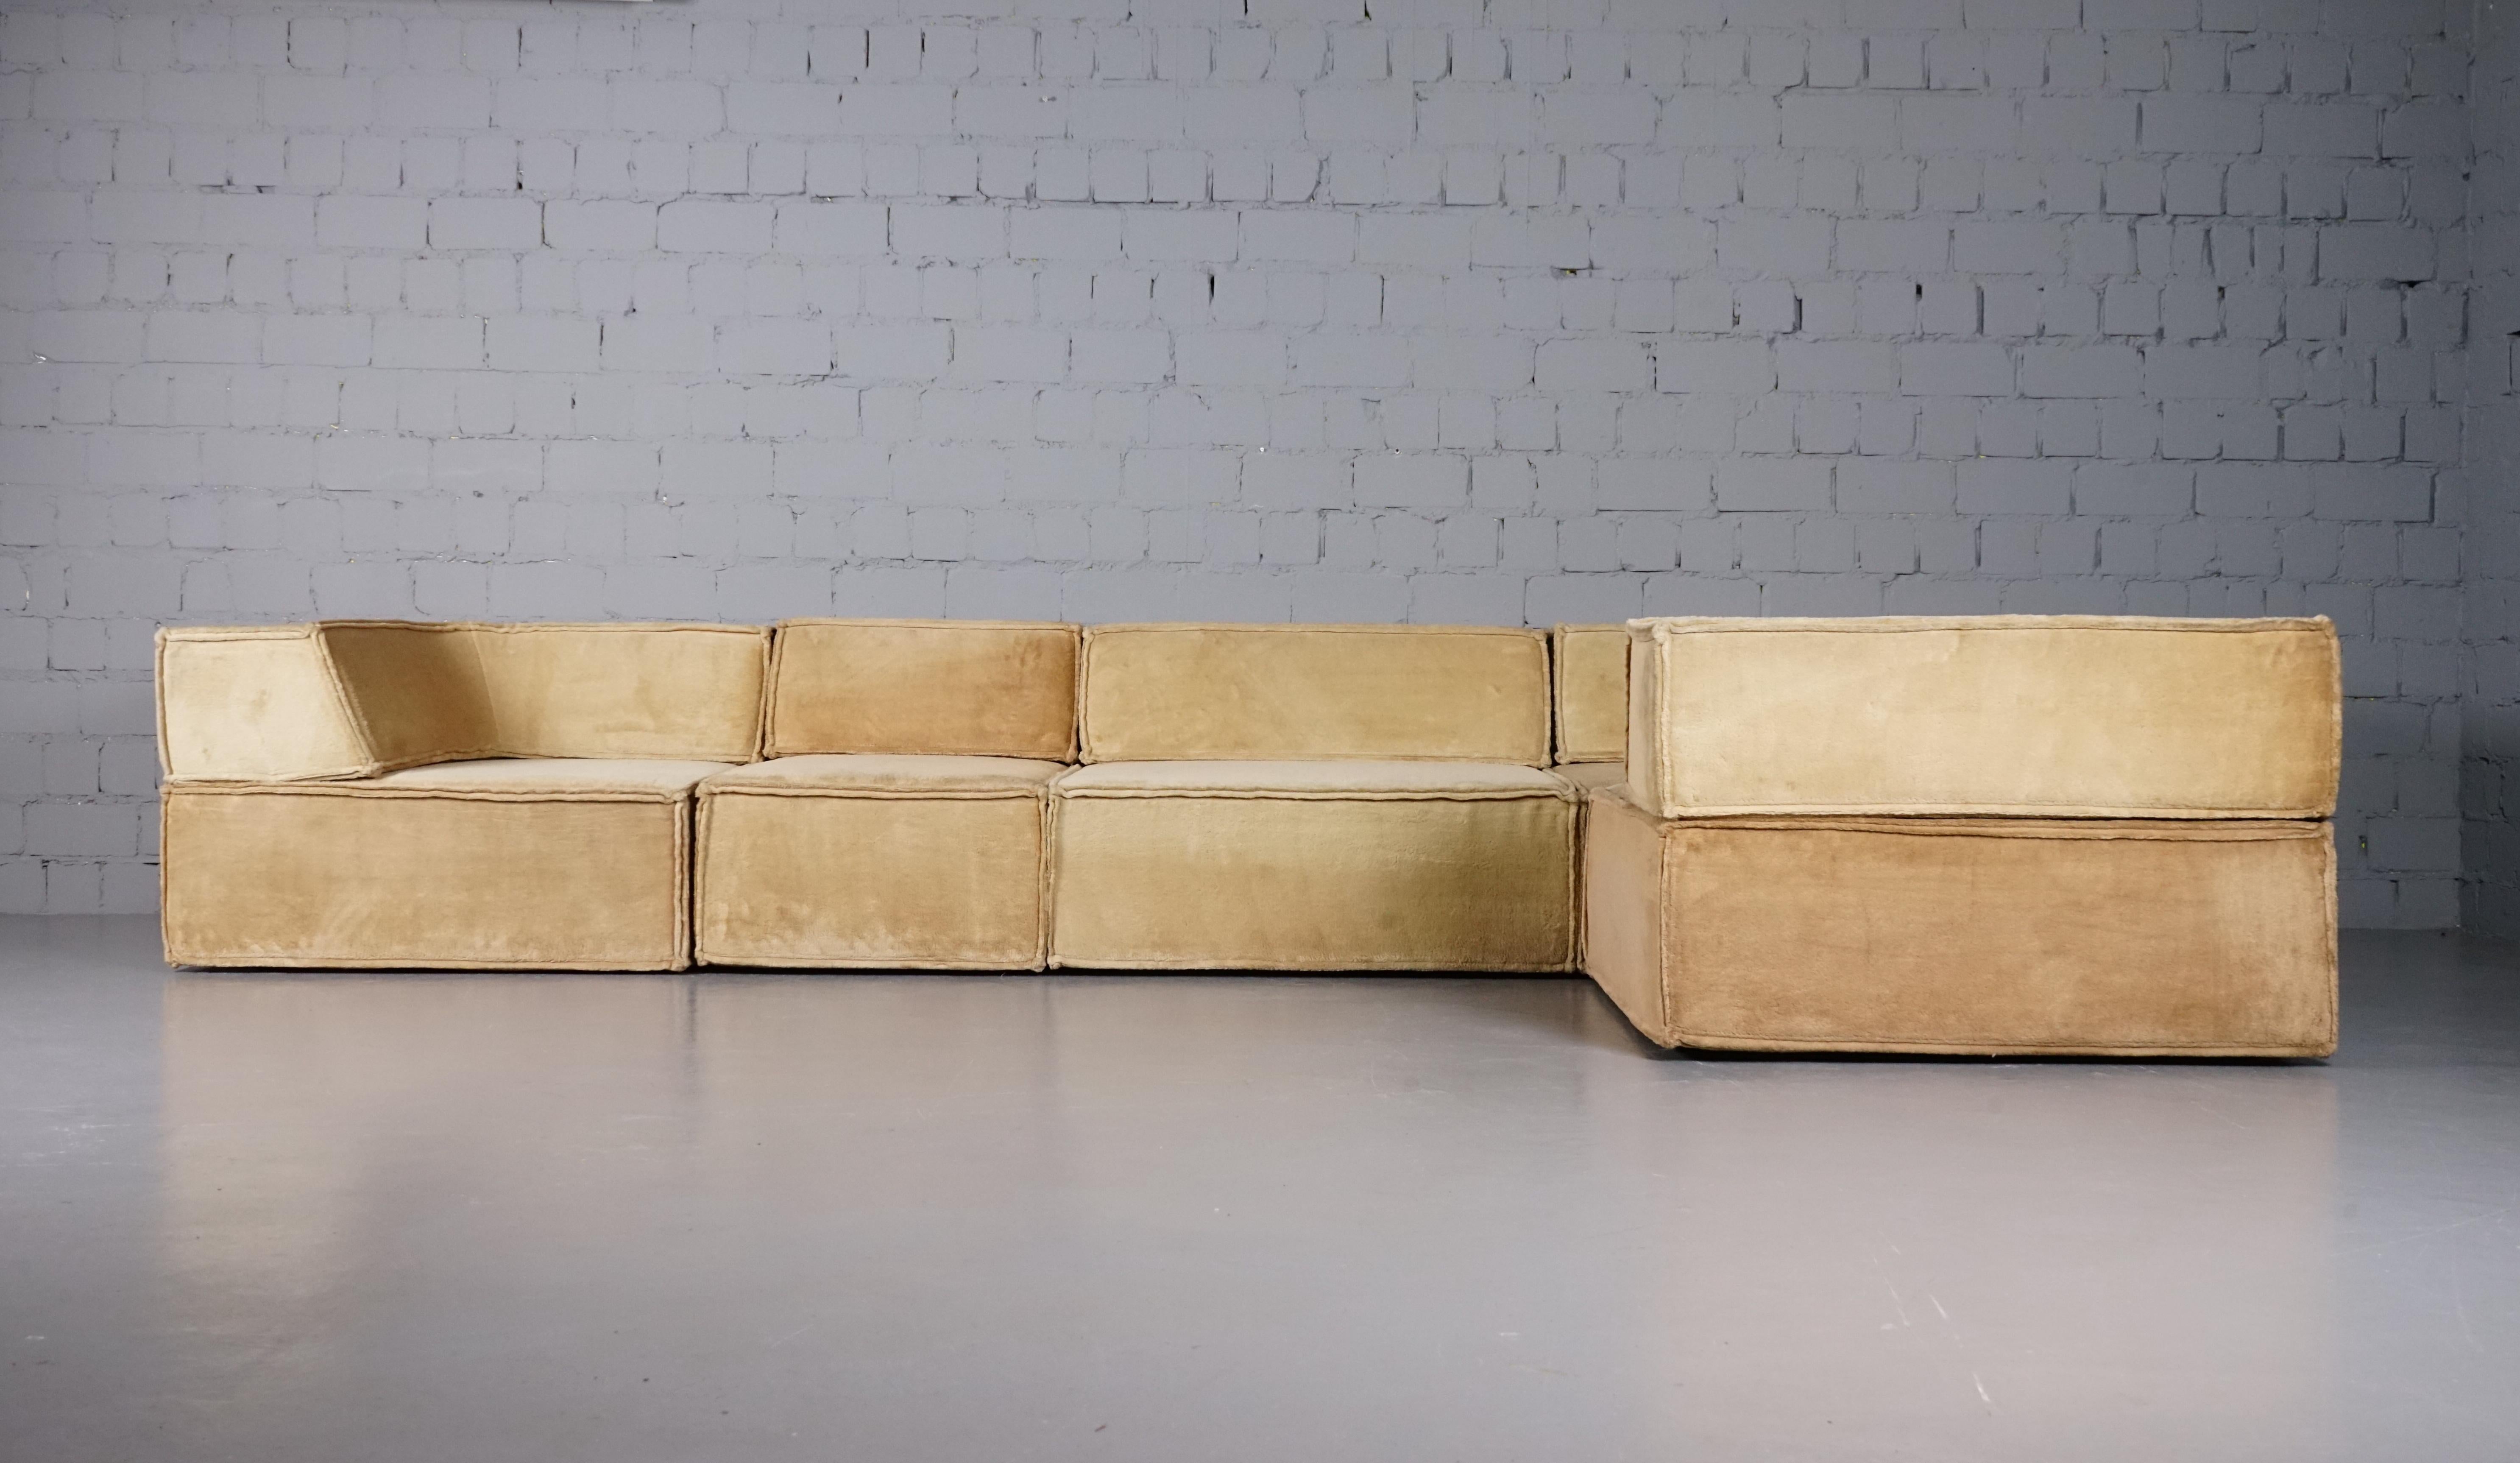 Designer:  Franz Hero and Karl Odermatt by Team Form AG
Brand: COR, Germany
Era: 1970’s
Material: Beige, Teddy Fabric
Size:  468 cm x 96 cm x 62,5 cm (first pricture)
Seat: High 36cm
Condition: Very Good 

Width/ Depth/ High / Seat height (first